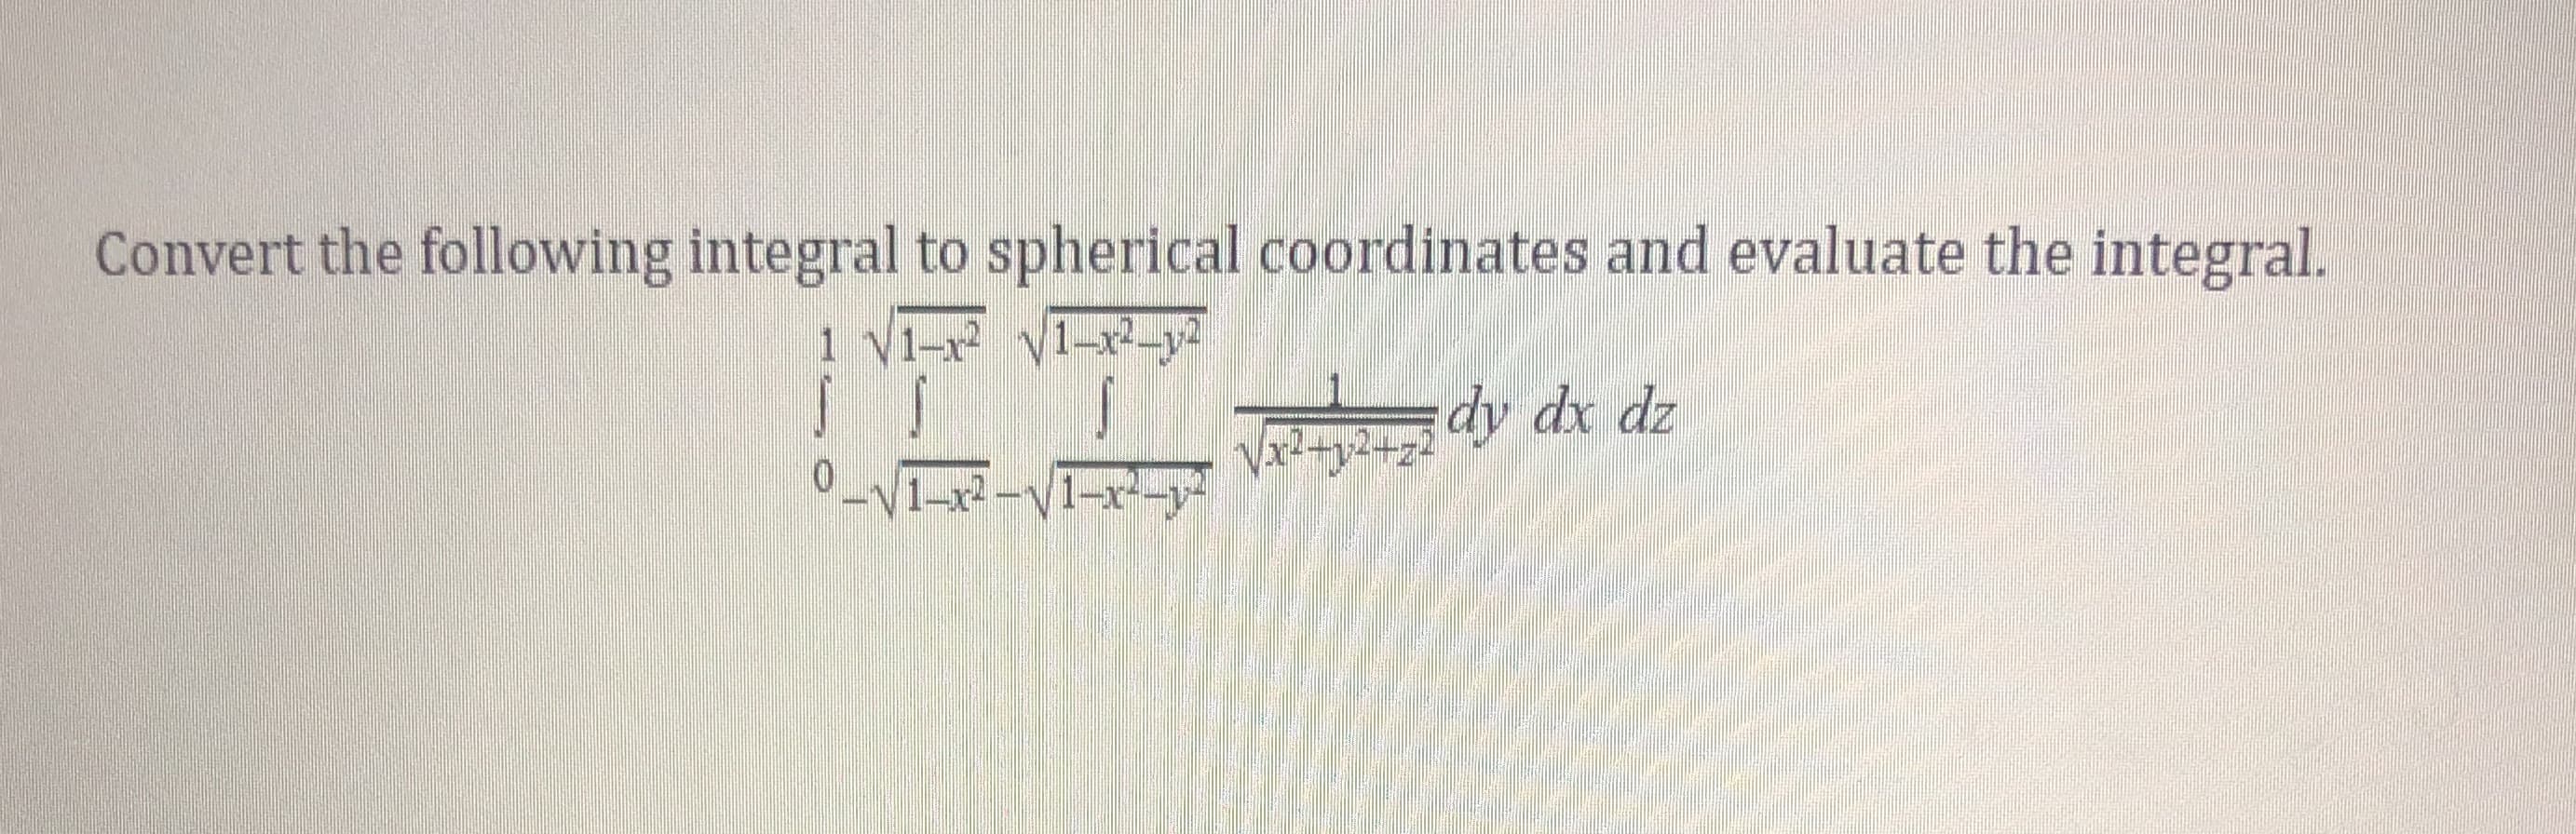 Convert the following integral to spherical coordinates and evaluate the integral.
1 Ni- NIA
dy de dz
